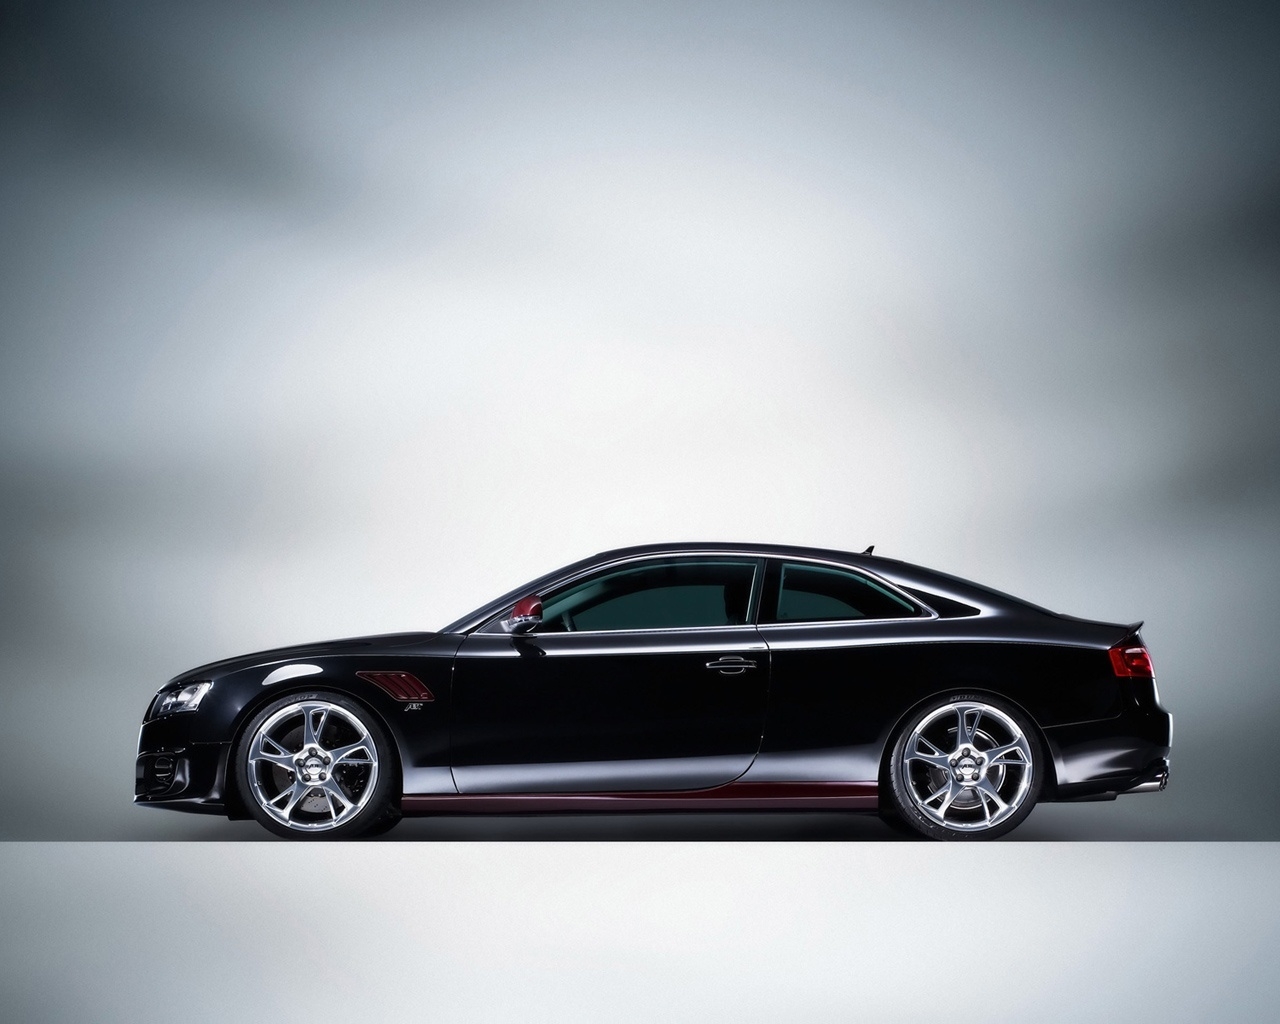 2008 Abt Audi AS5 - Side for 1280 x 1024 resolution